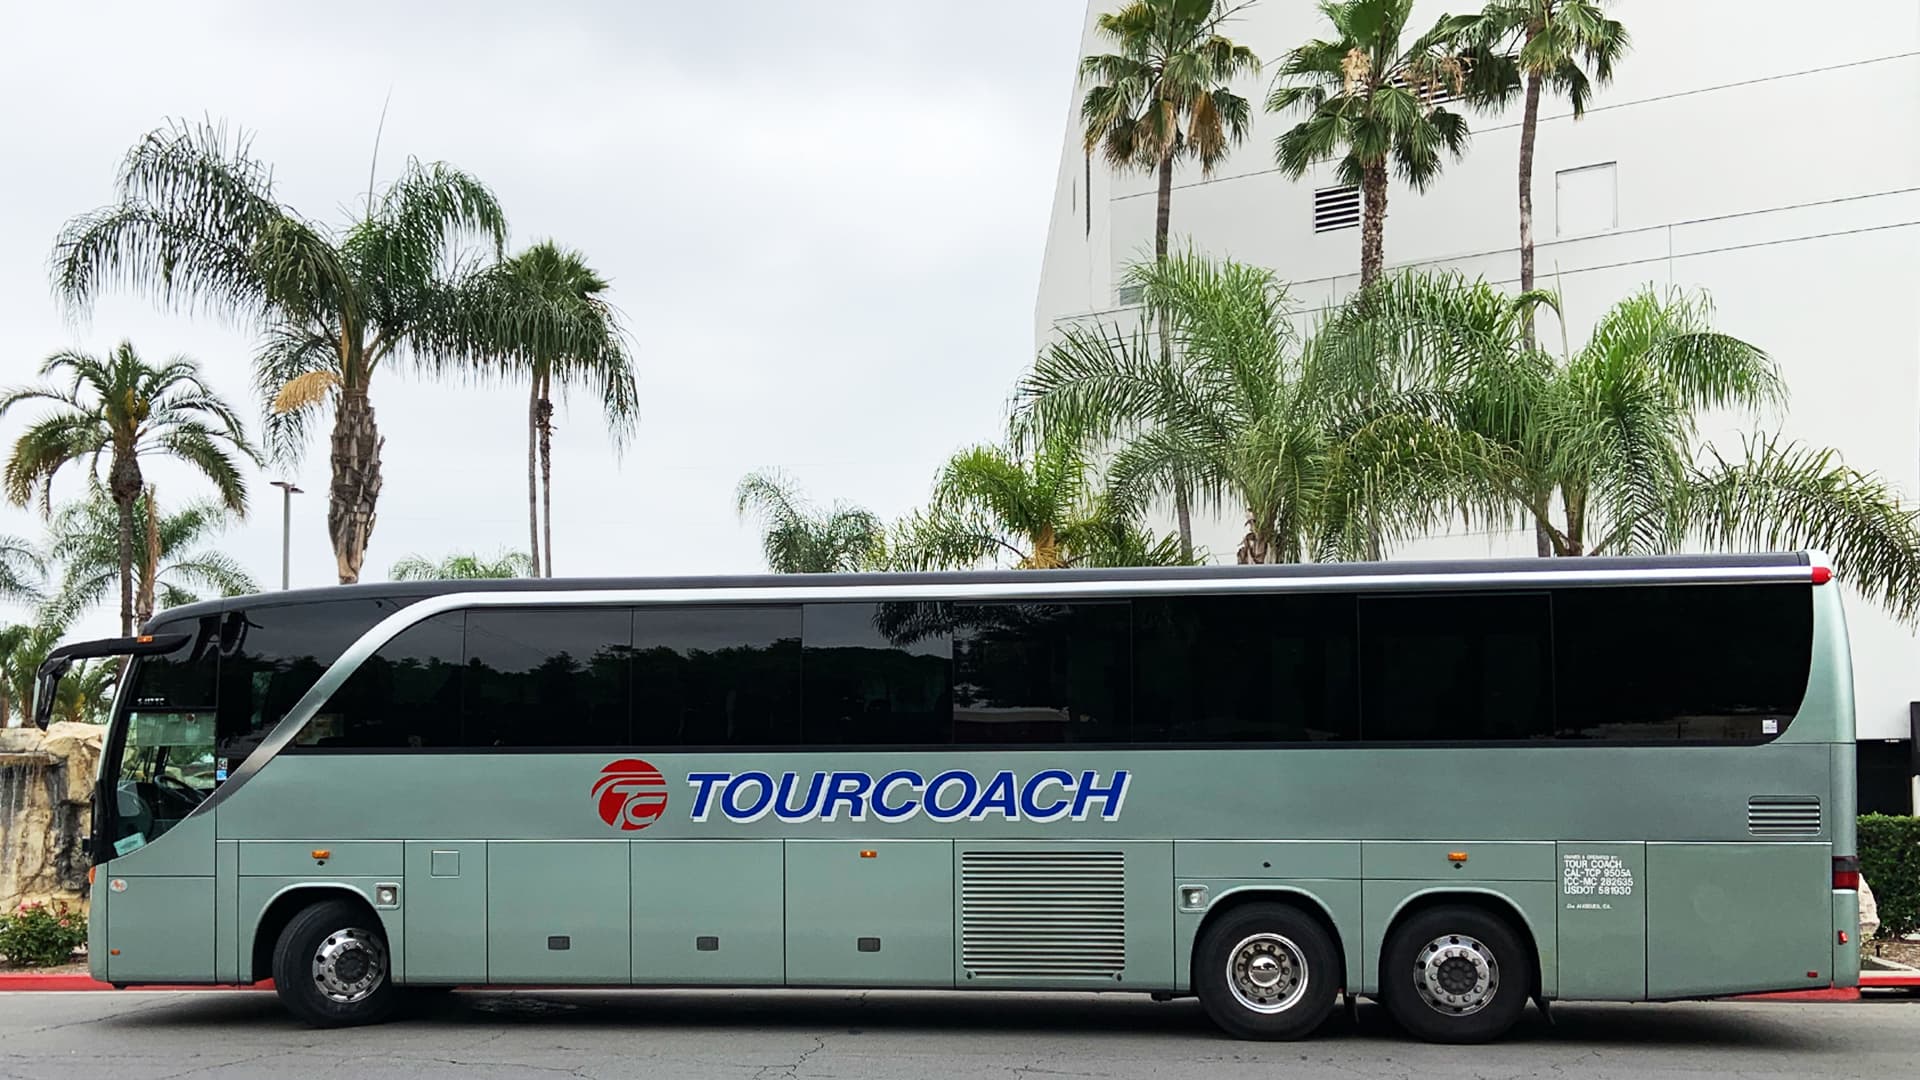 TourCoach bus with palm trees in background